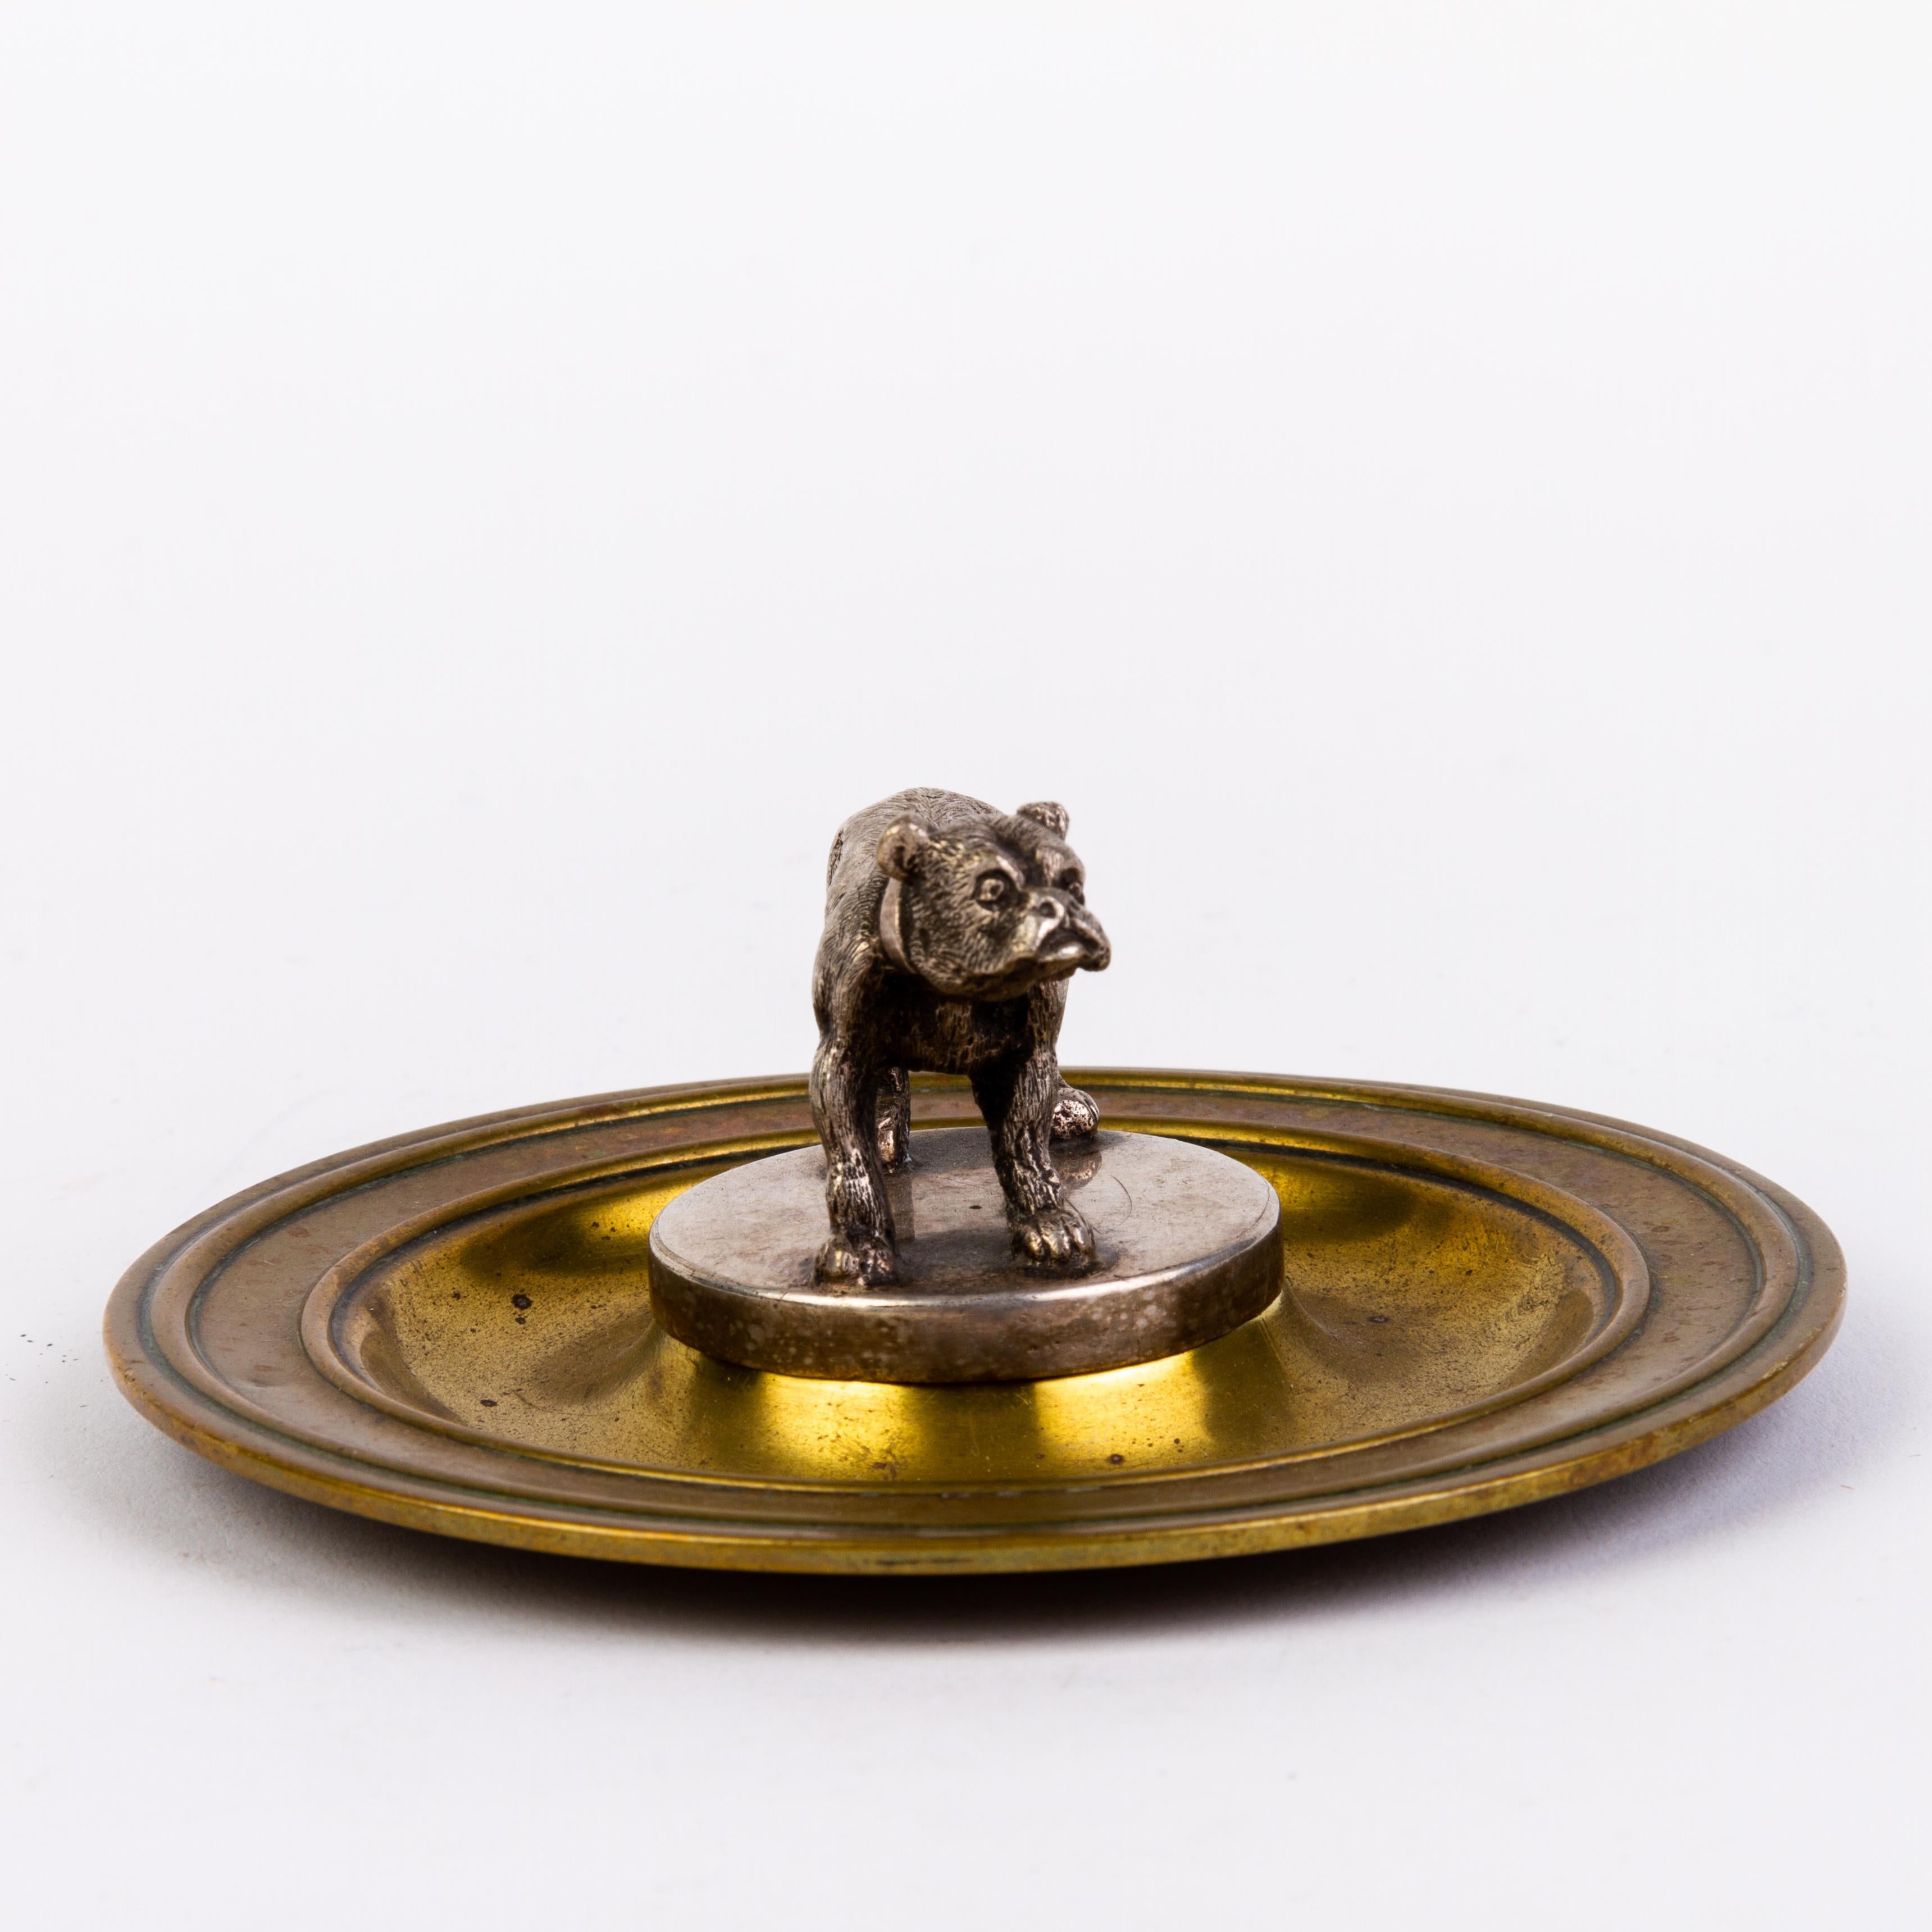 Victorian English Fine Silver & Brass Sculpture Bulldog Ashtray 19th Century 
Good condition
From a private collection.
Free international shipping.